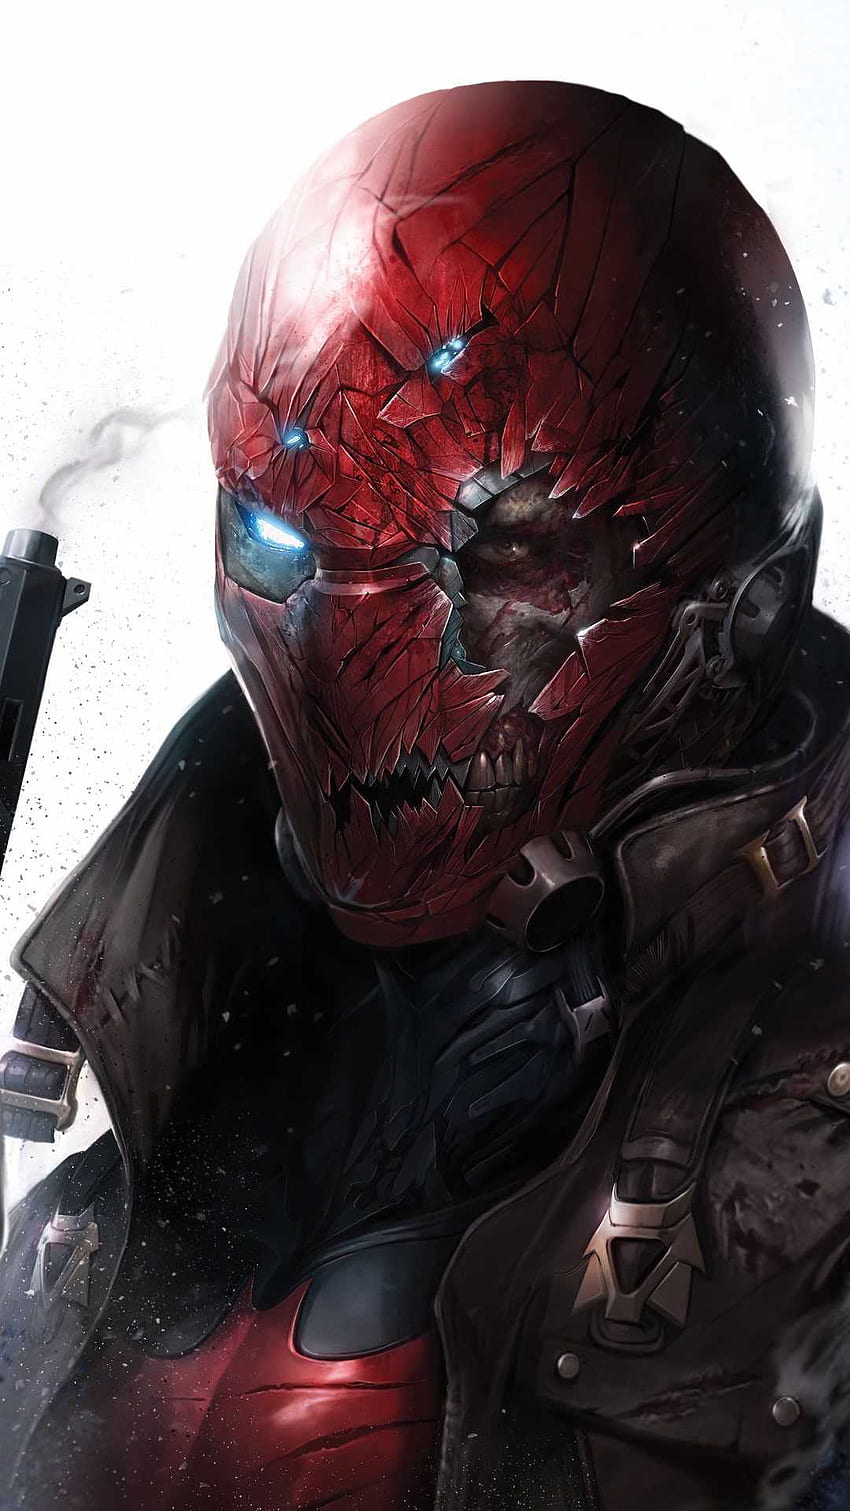 Red Hood in the night Wallpaper ID5358